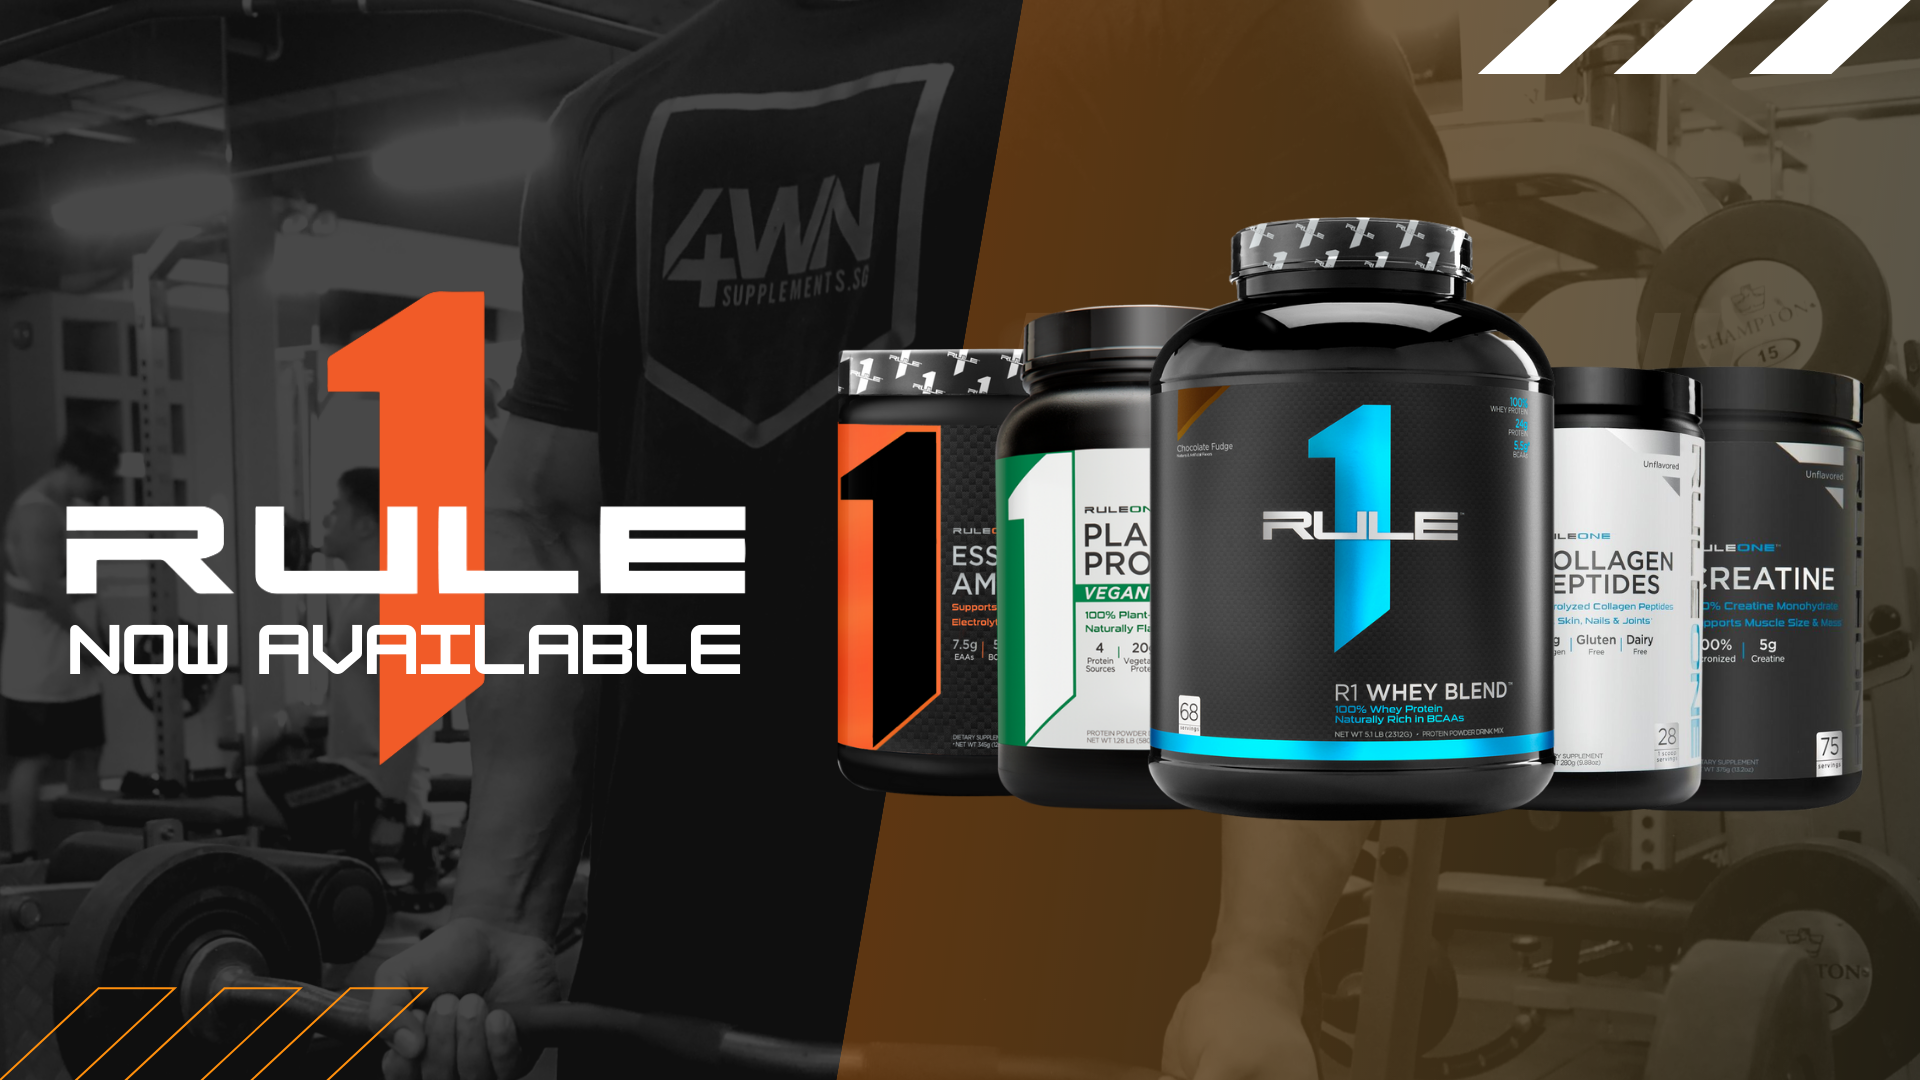 A New Brand has arrived at 4WN Supplements